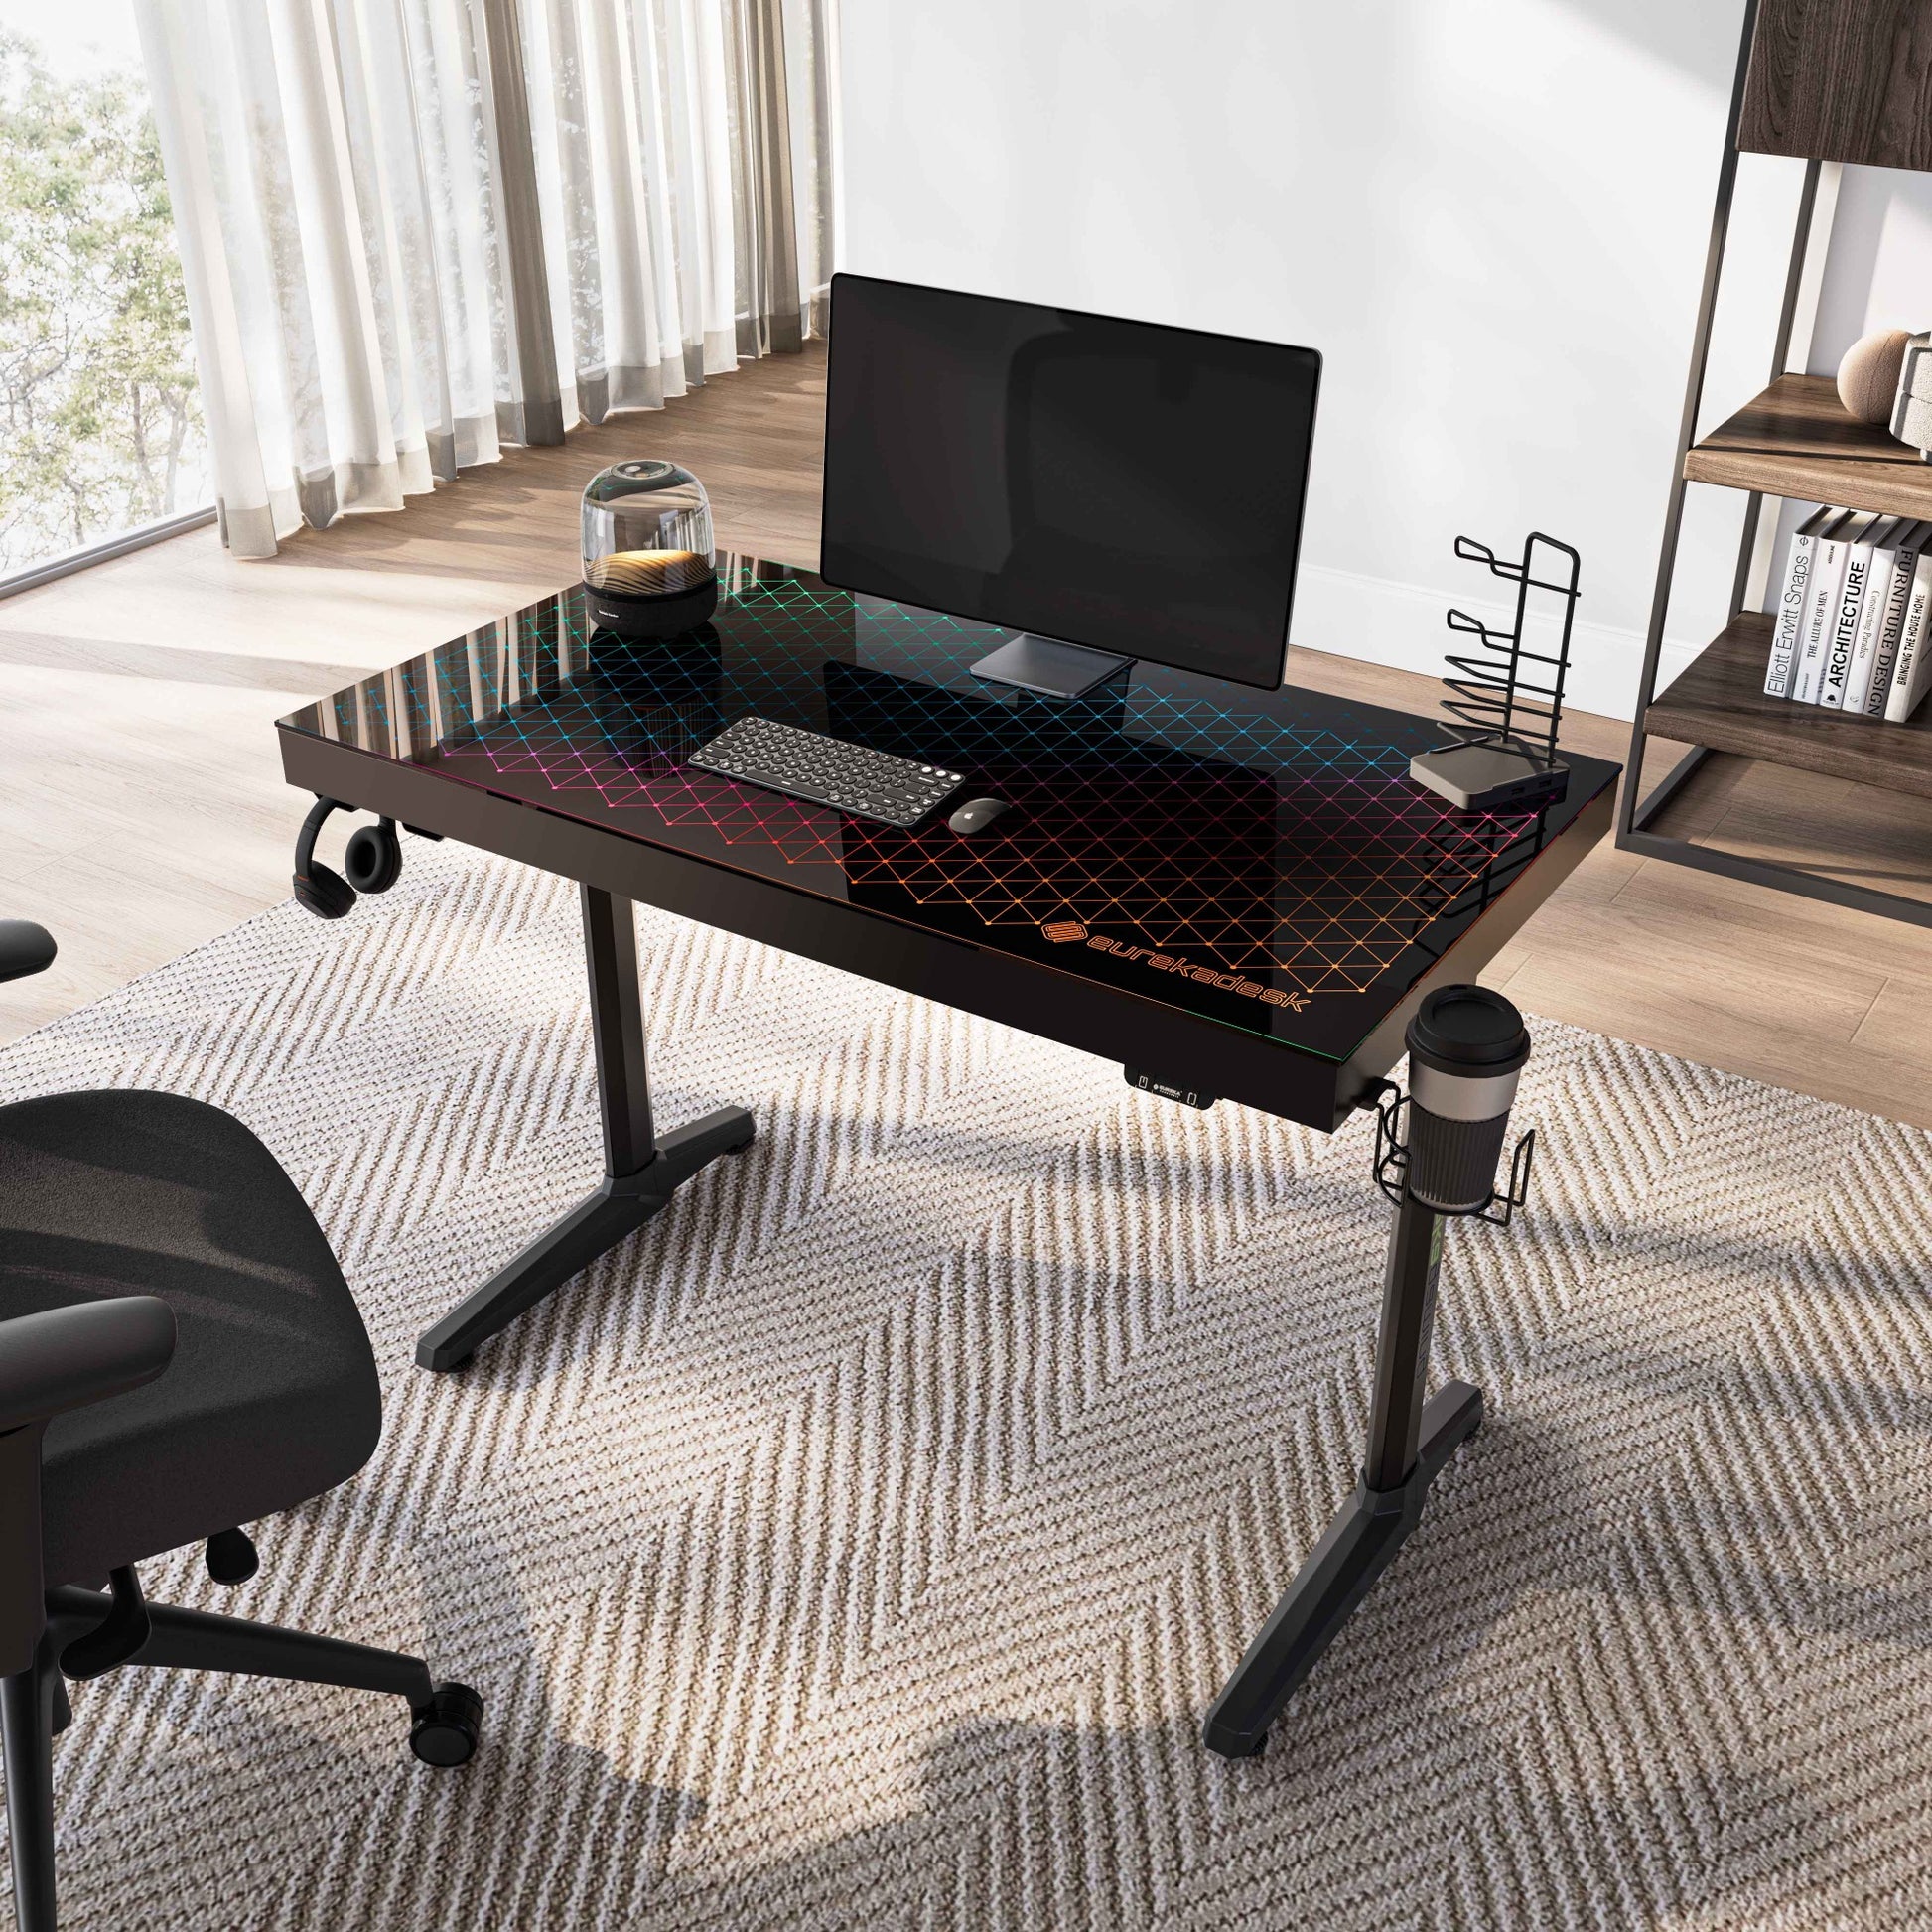 GTG-I43 43 inch Glass RGB Desktop Gaming Desk, Fixed Height Desk, with Accessory Set, Lifestyle